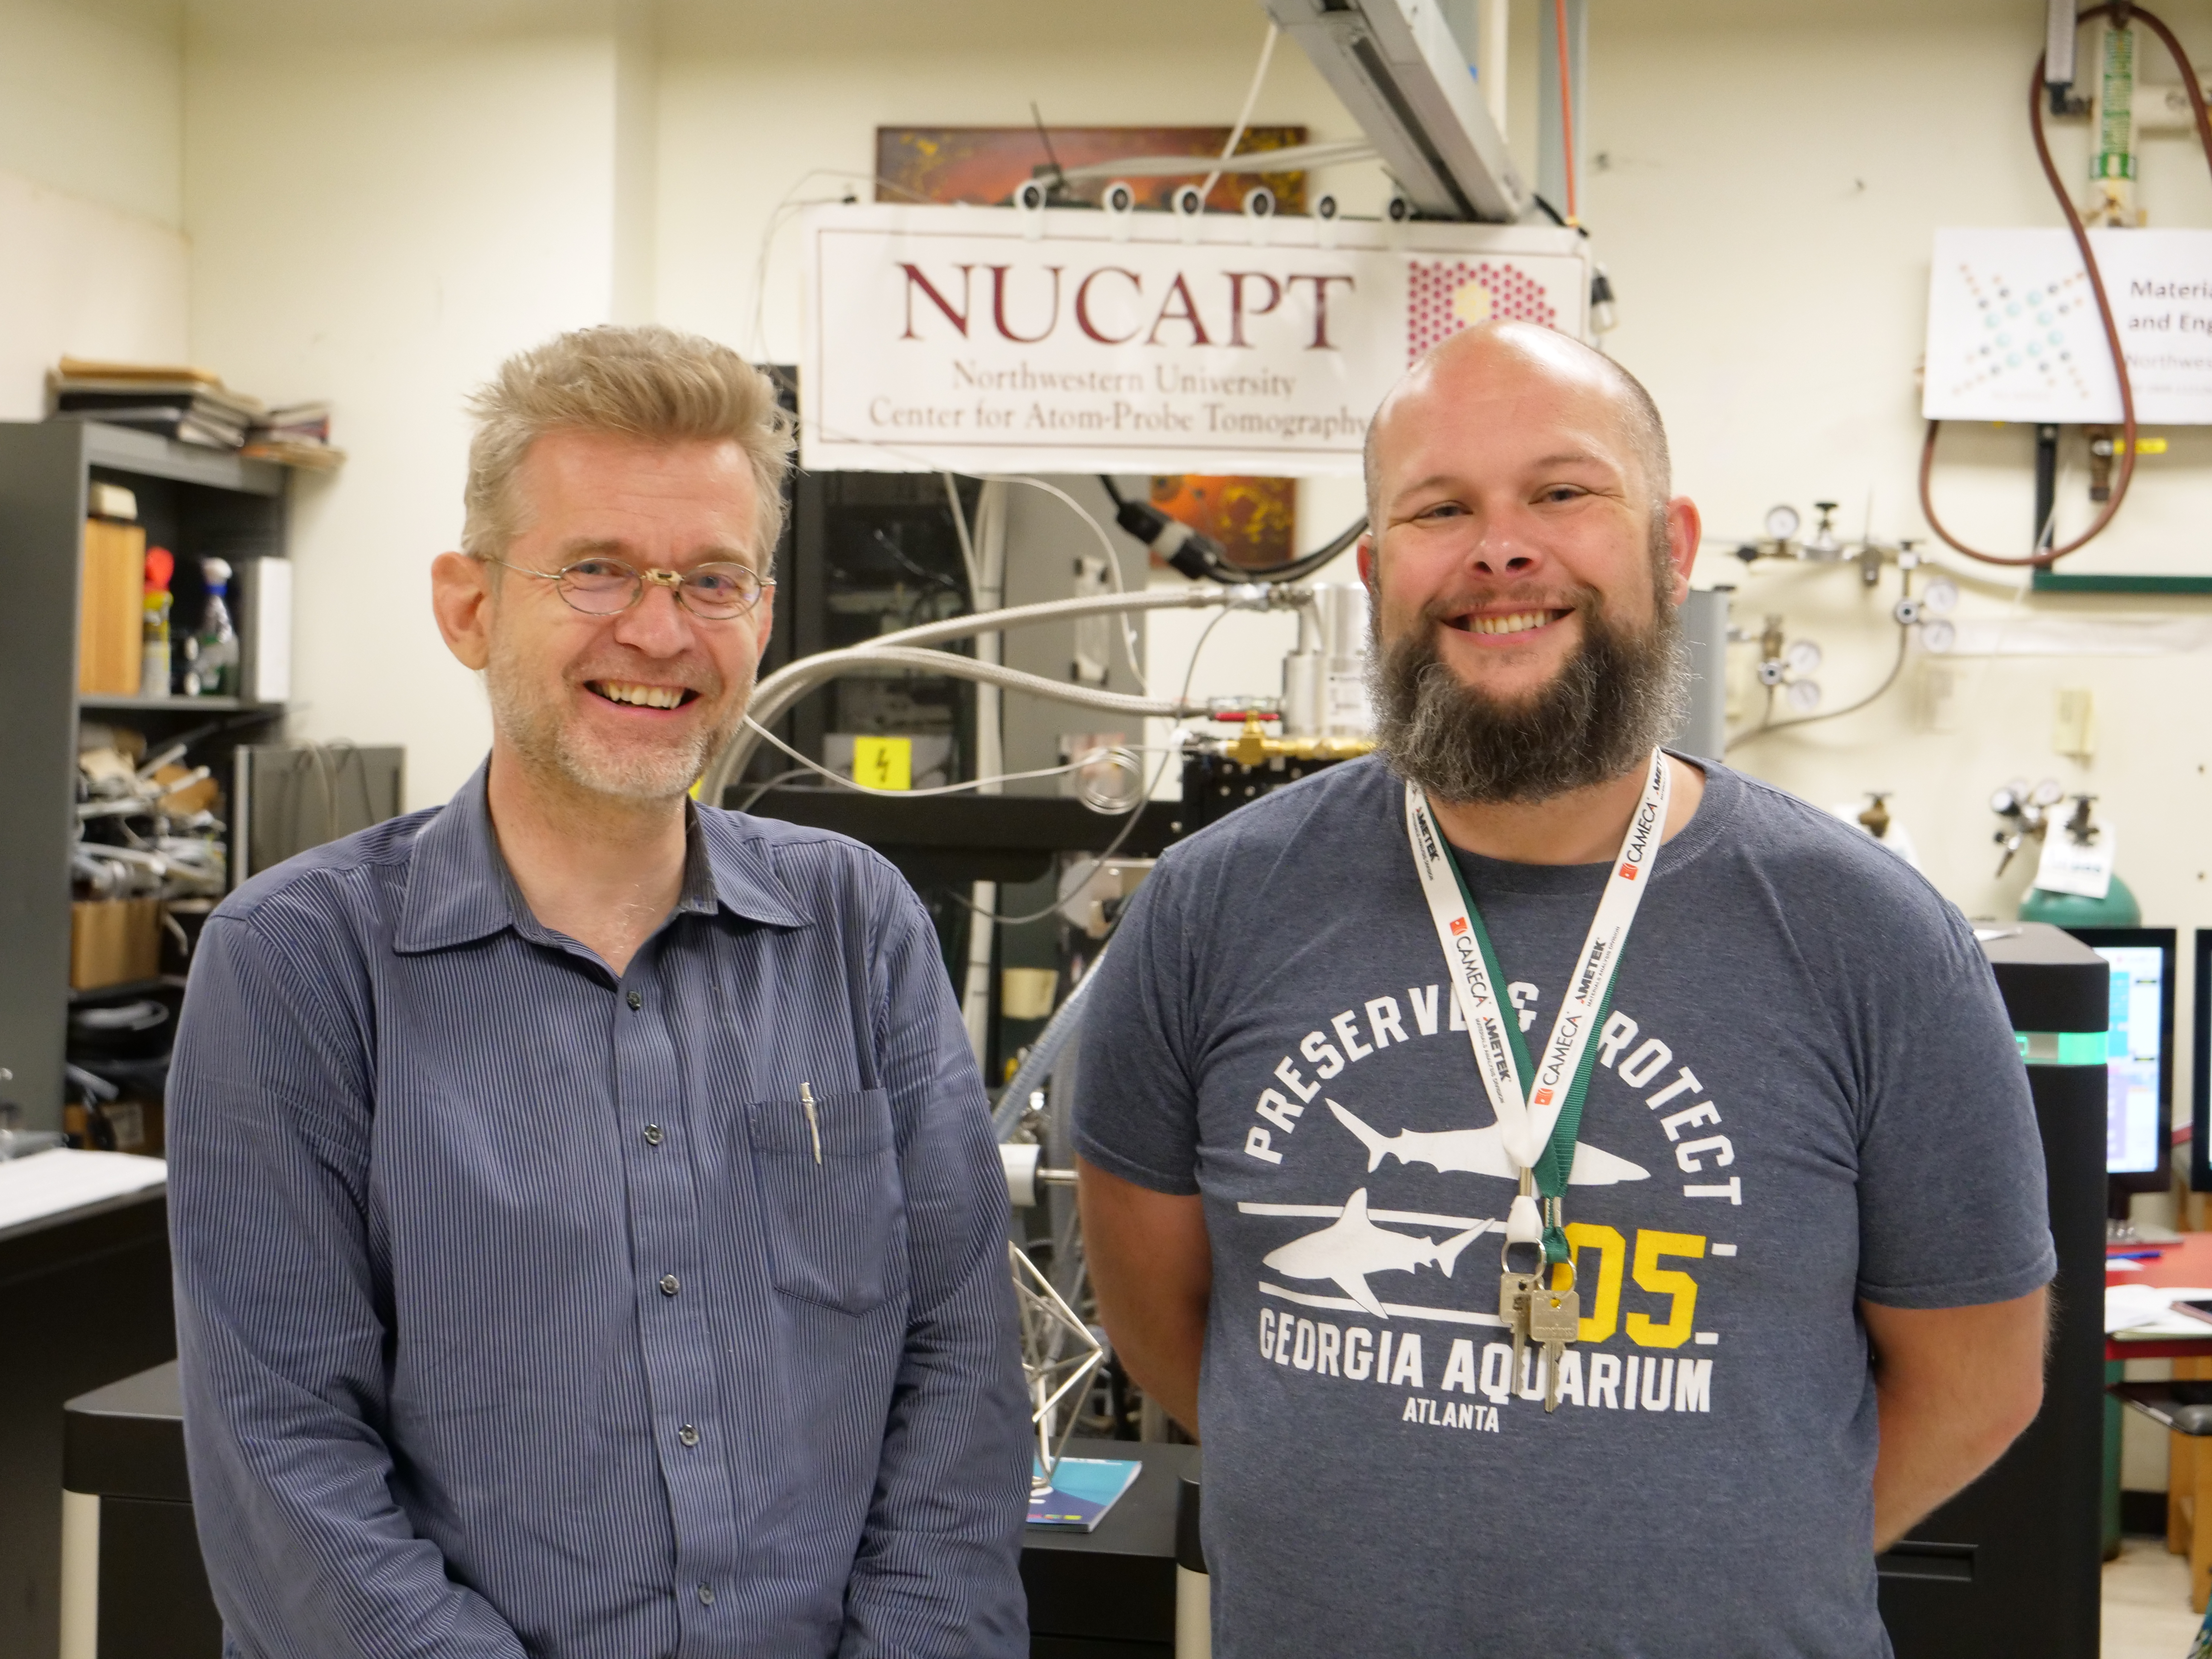 Brian Skot Holcome with his mentor, Dieter Isham, Research Associate Professor at Northwestern University Center for Atom-Probe Tomography (NUCAPT)